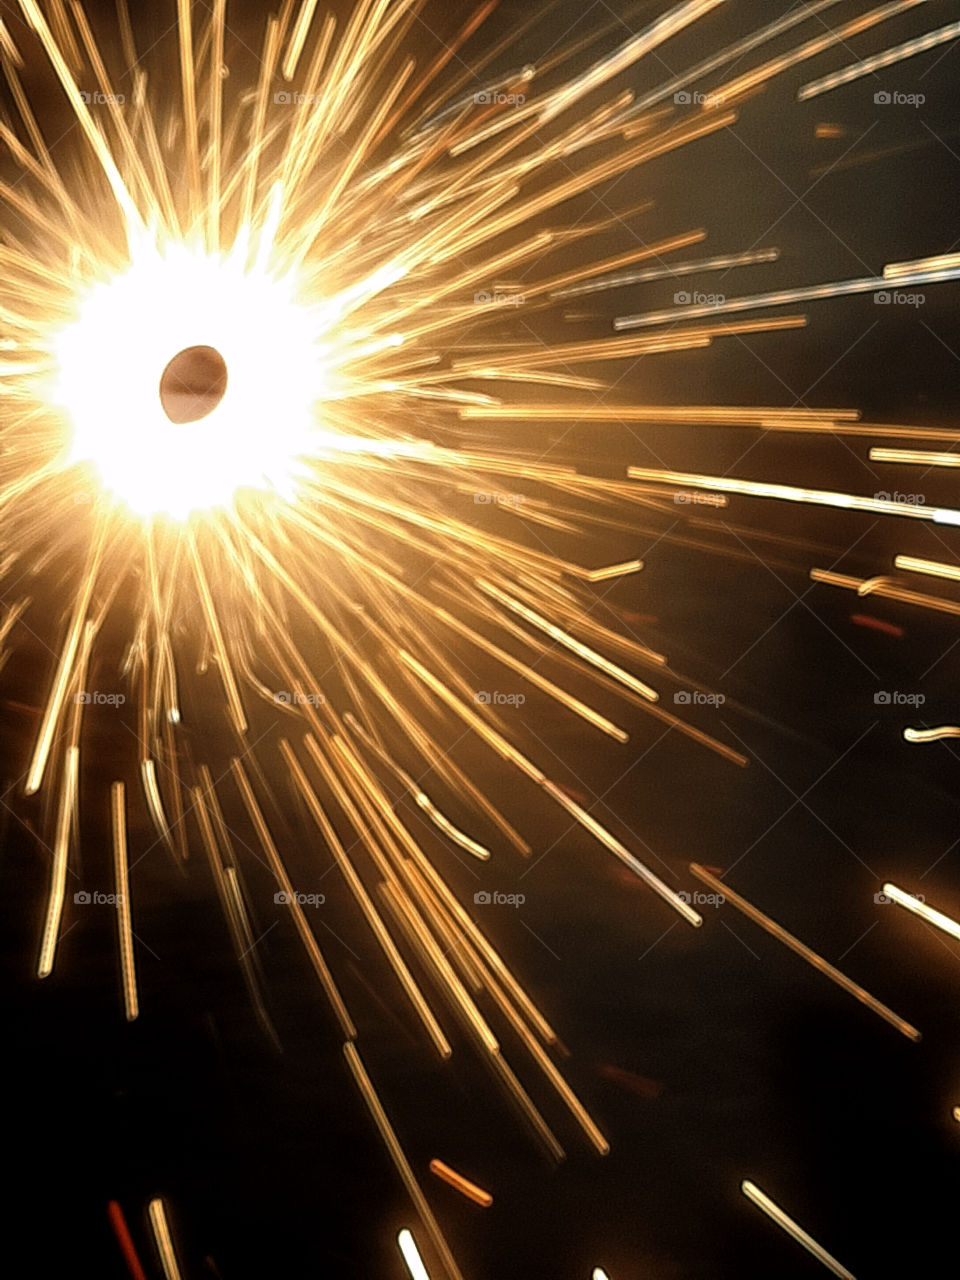 Captured a beautiful shot of a spinning firecracker/Whirlgig or Charkhi during Diwali celebration in India.